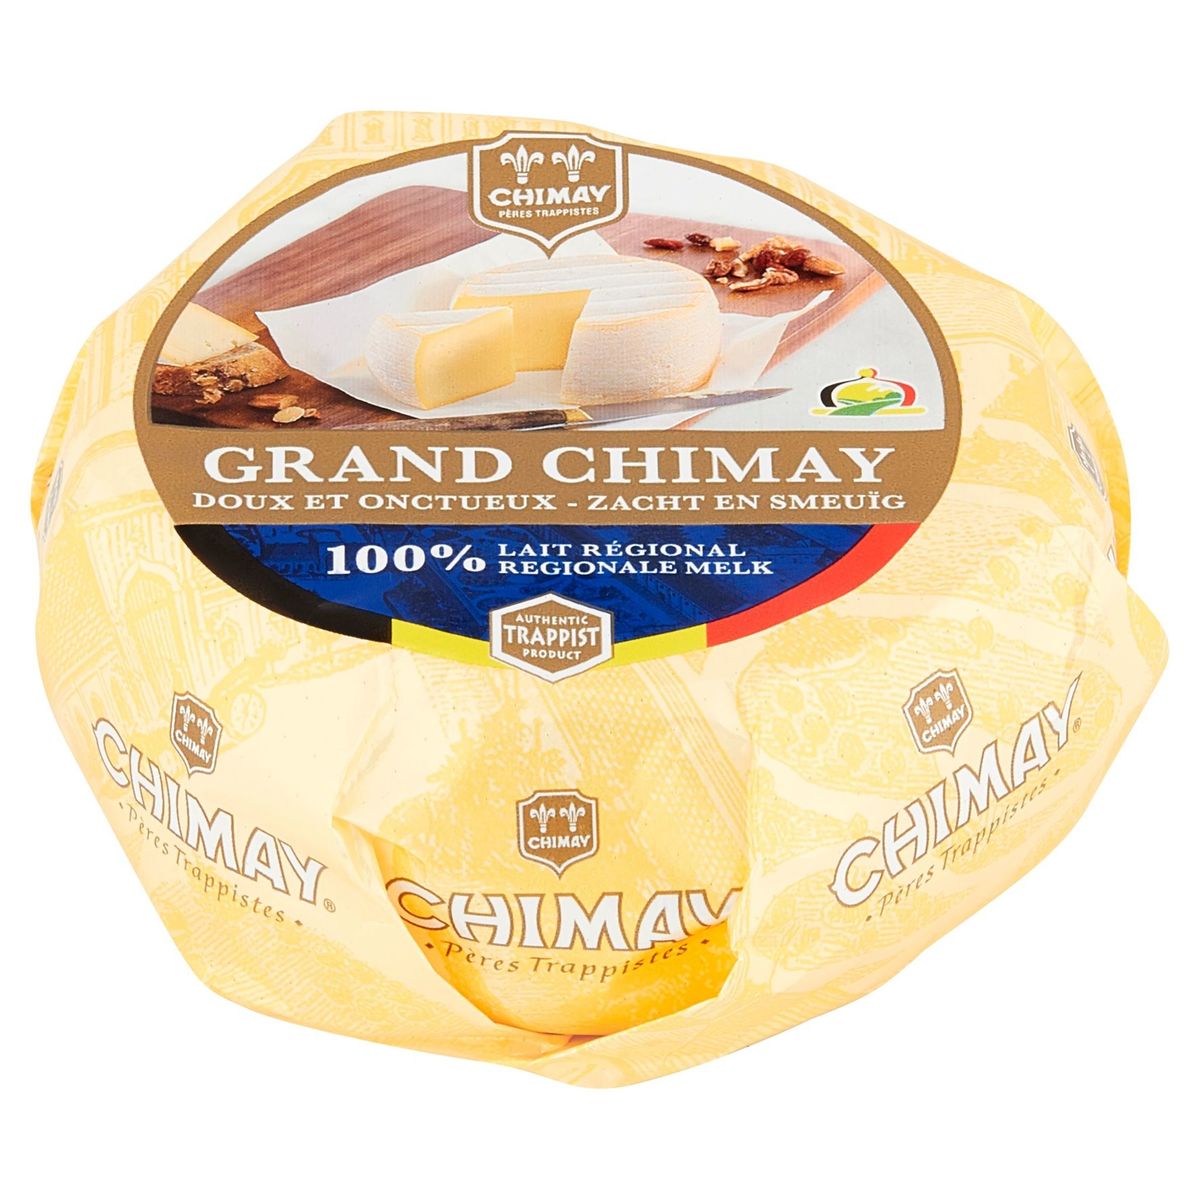 Chimay Grand Chimay Doux et Onctueux 320 g